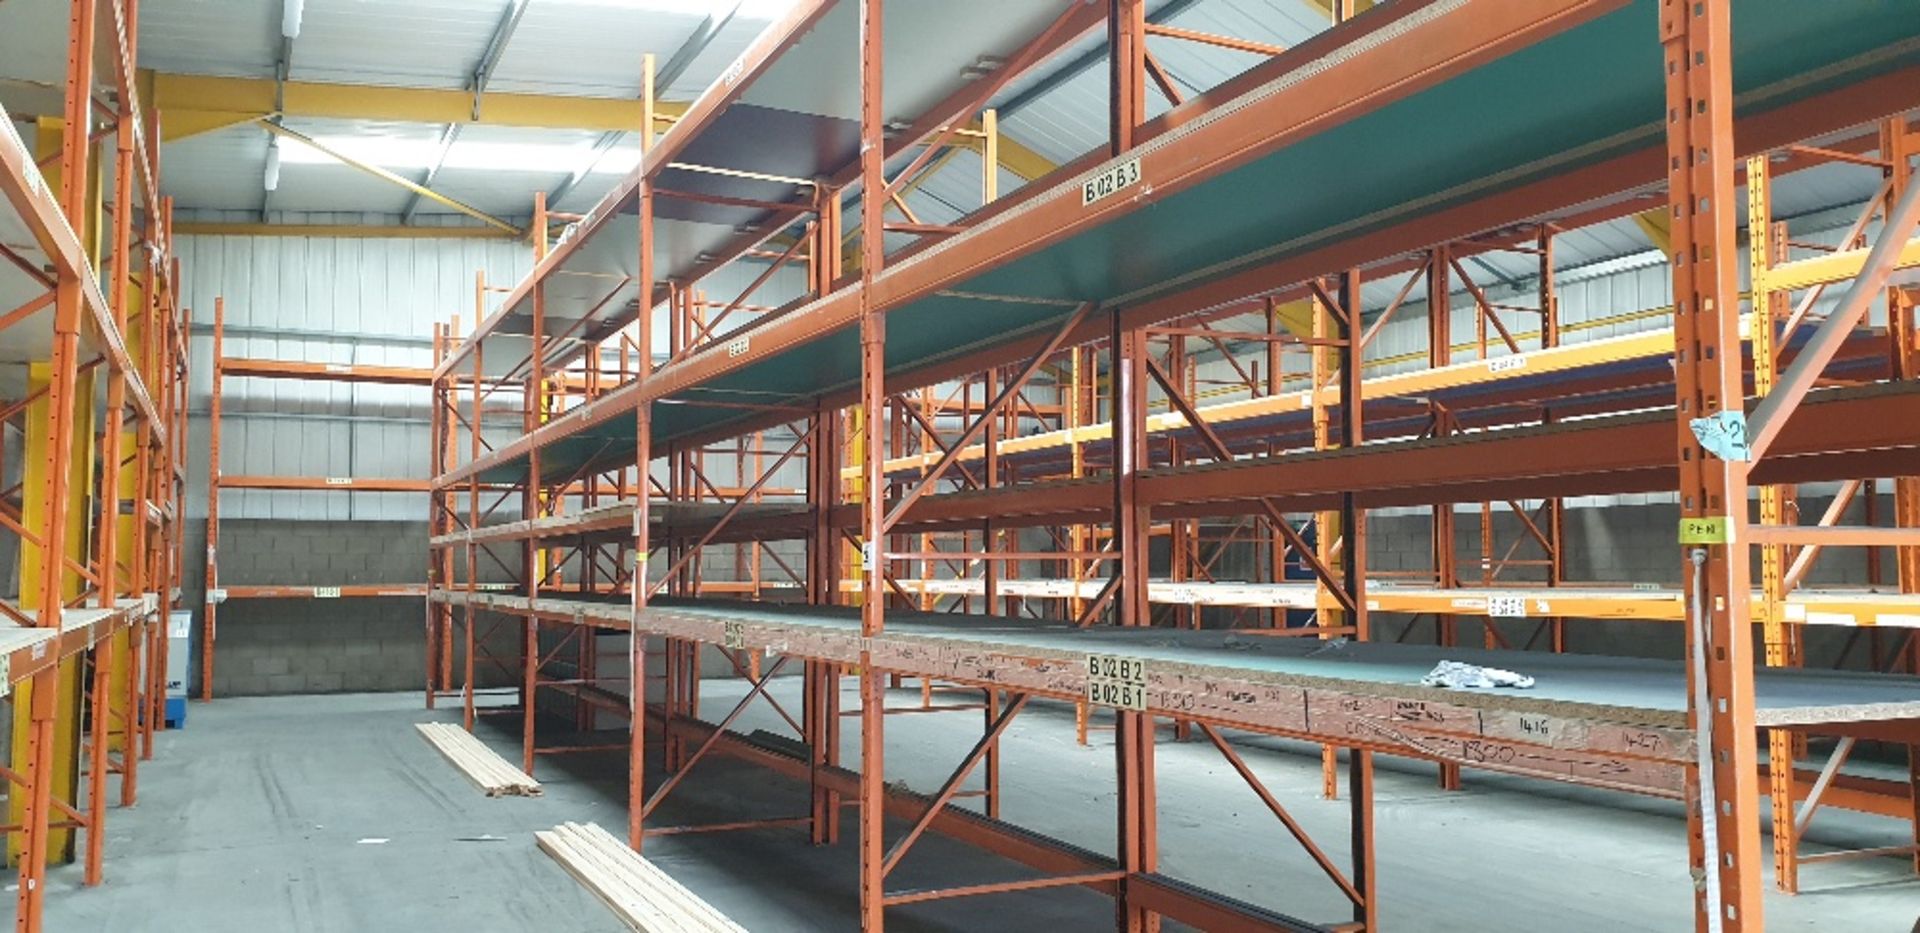 5 - bays of heavy duty pallet racking with 25mm MDF and chipboard shelving